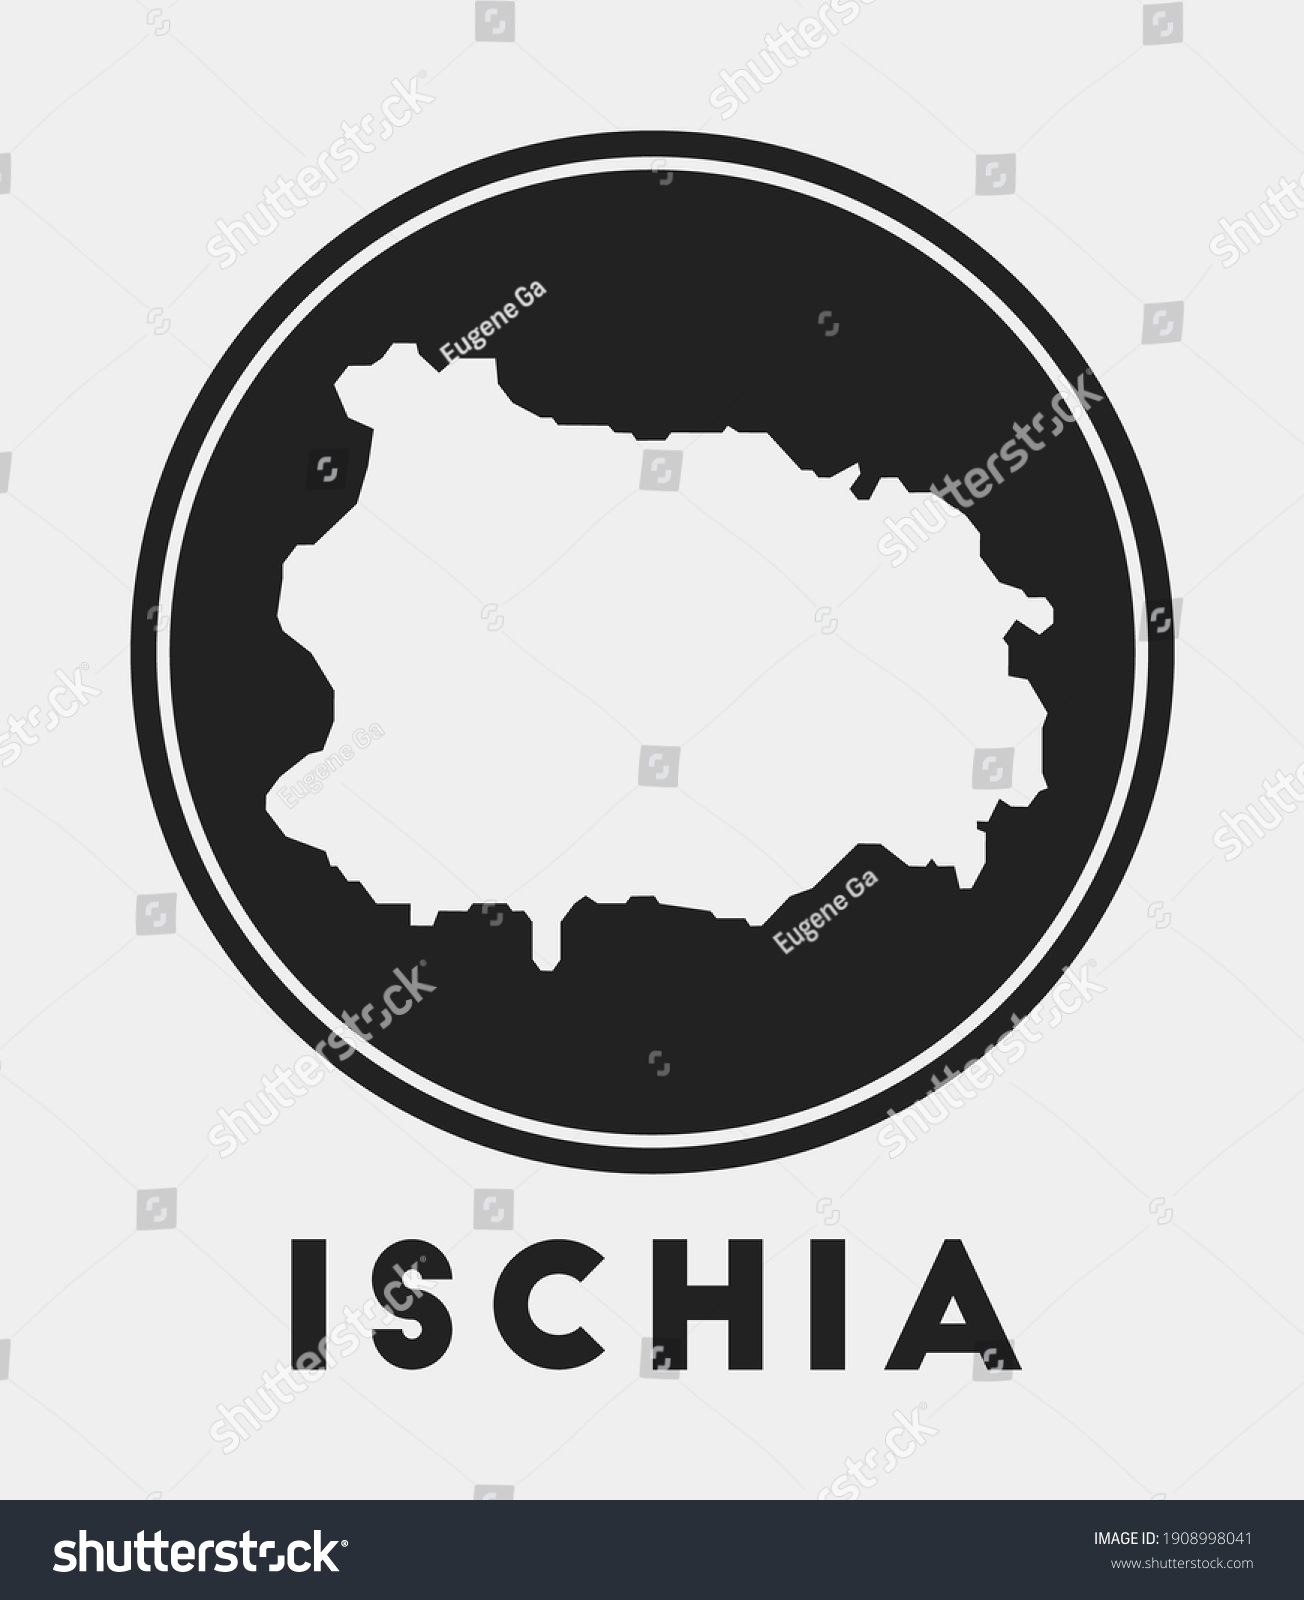 Ischia icon. Round logo with island map and - Royalty Free Stock Vector ...